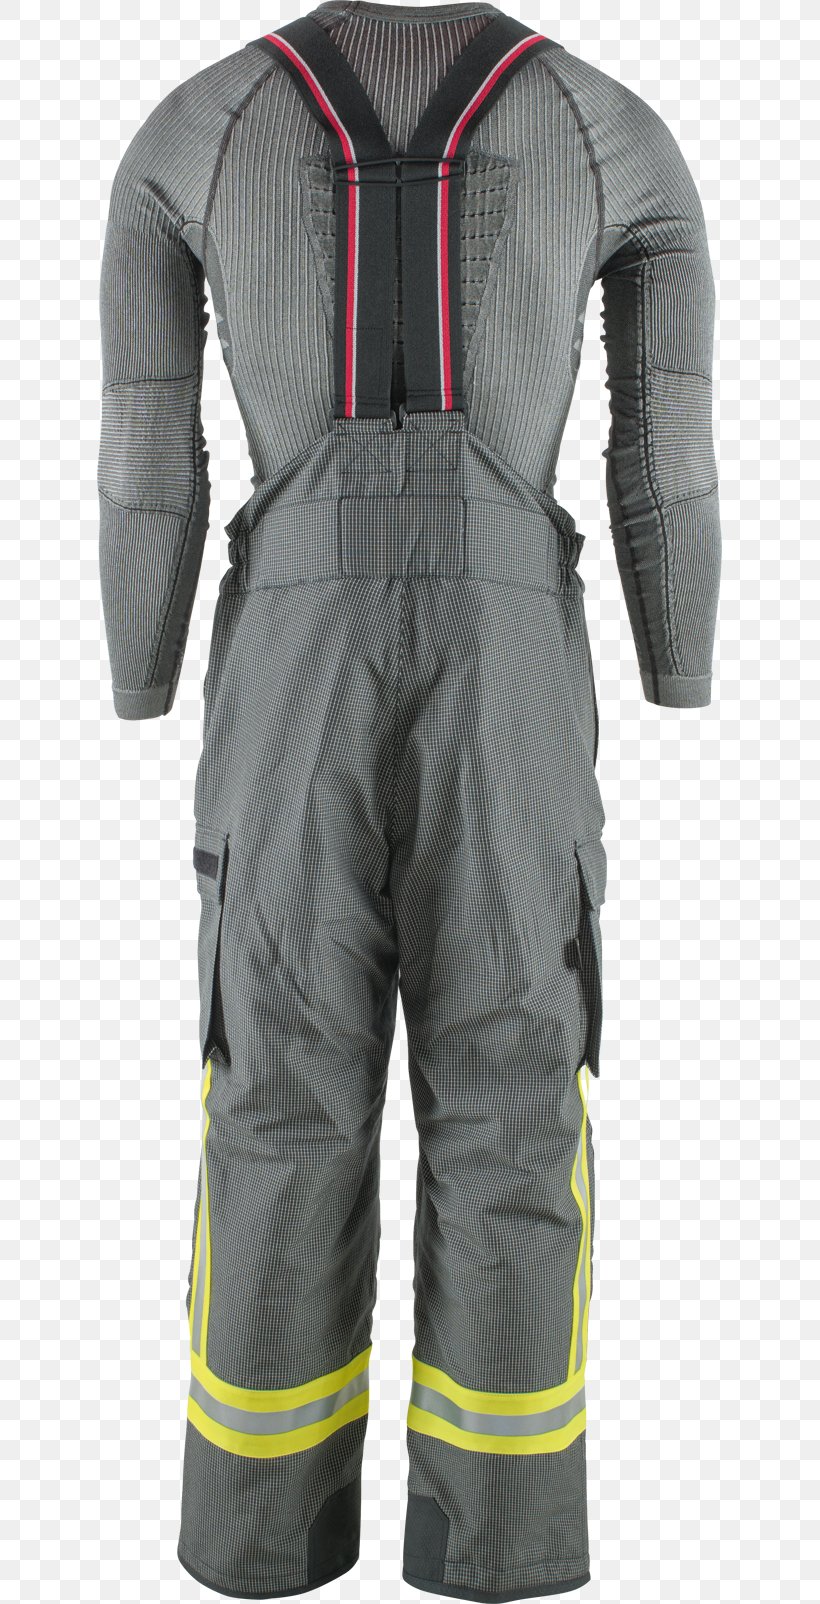 Hockey Protective Pants & Ski Shorts Overall Clothing Motorcycle Grey, PNG, 625x1604px, Hockey Protective Pants Ski Shorts, Clothing, Grey, Hockey, Motorcycle Download Free